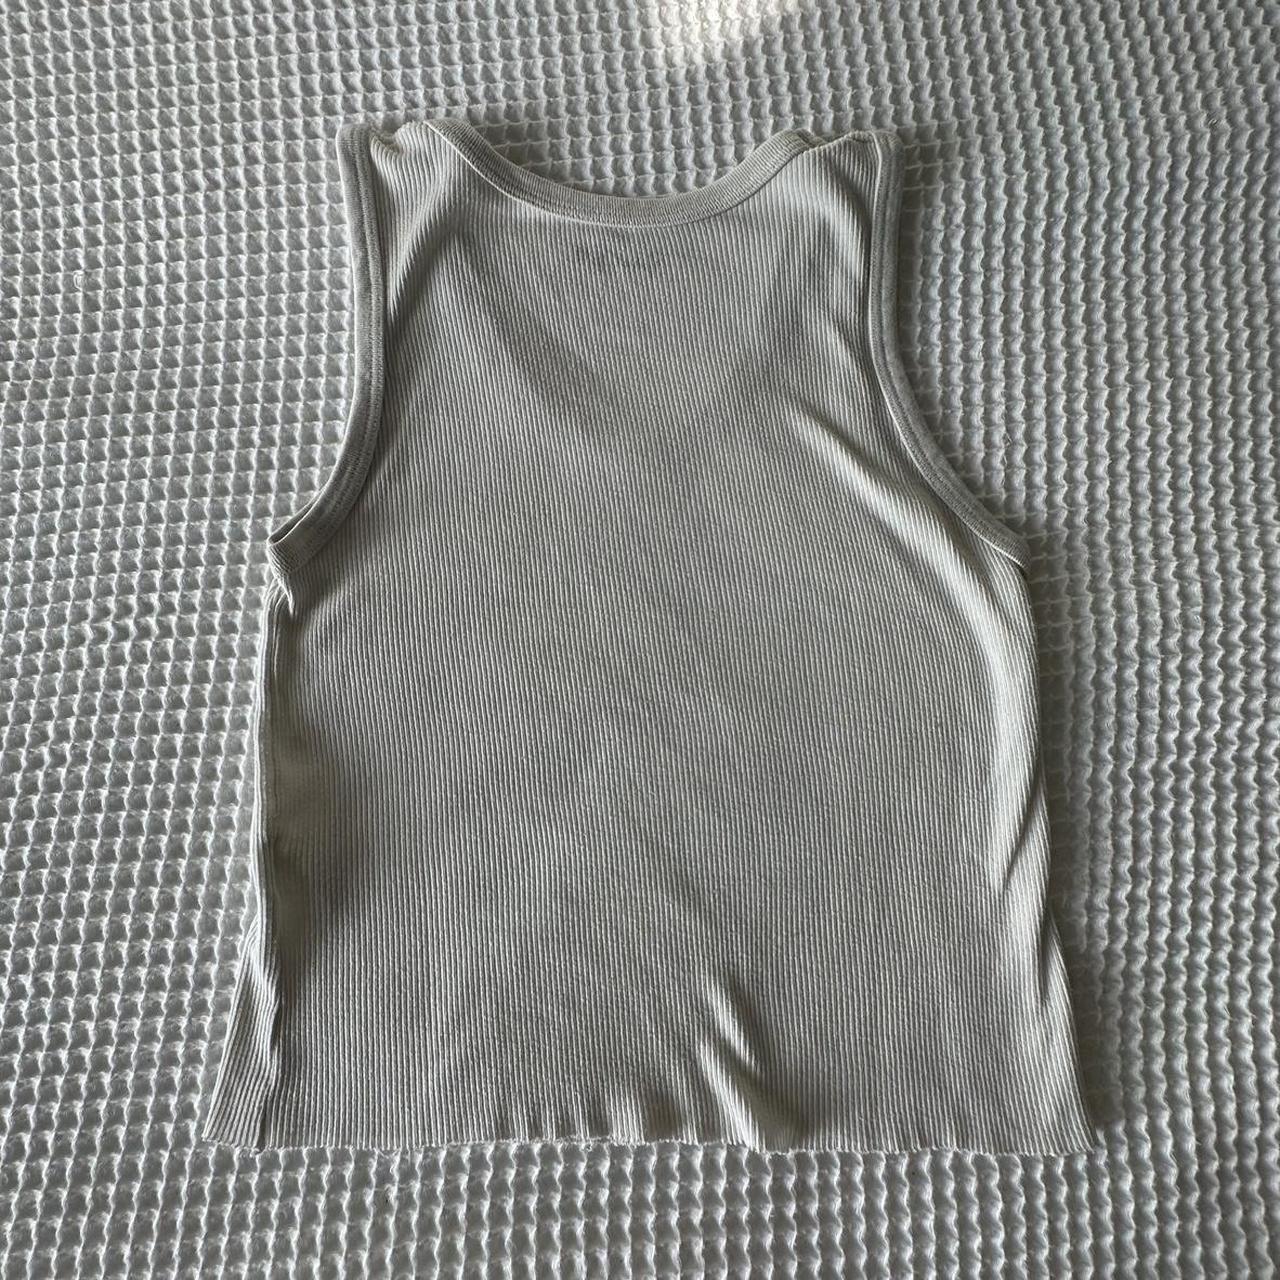 Brandy Melville Connor Tank Gray - $8 (50% Off Retail) - From Grace